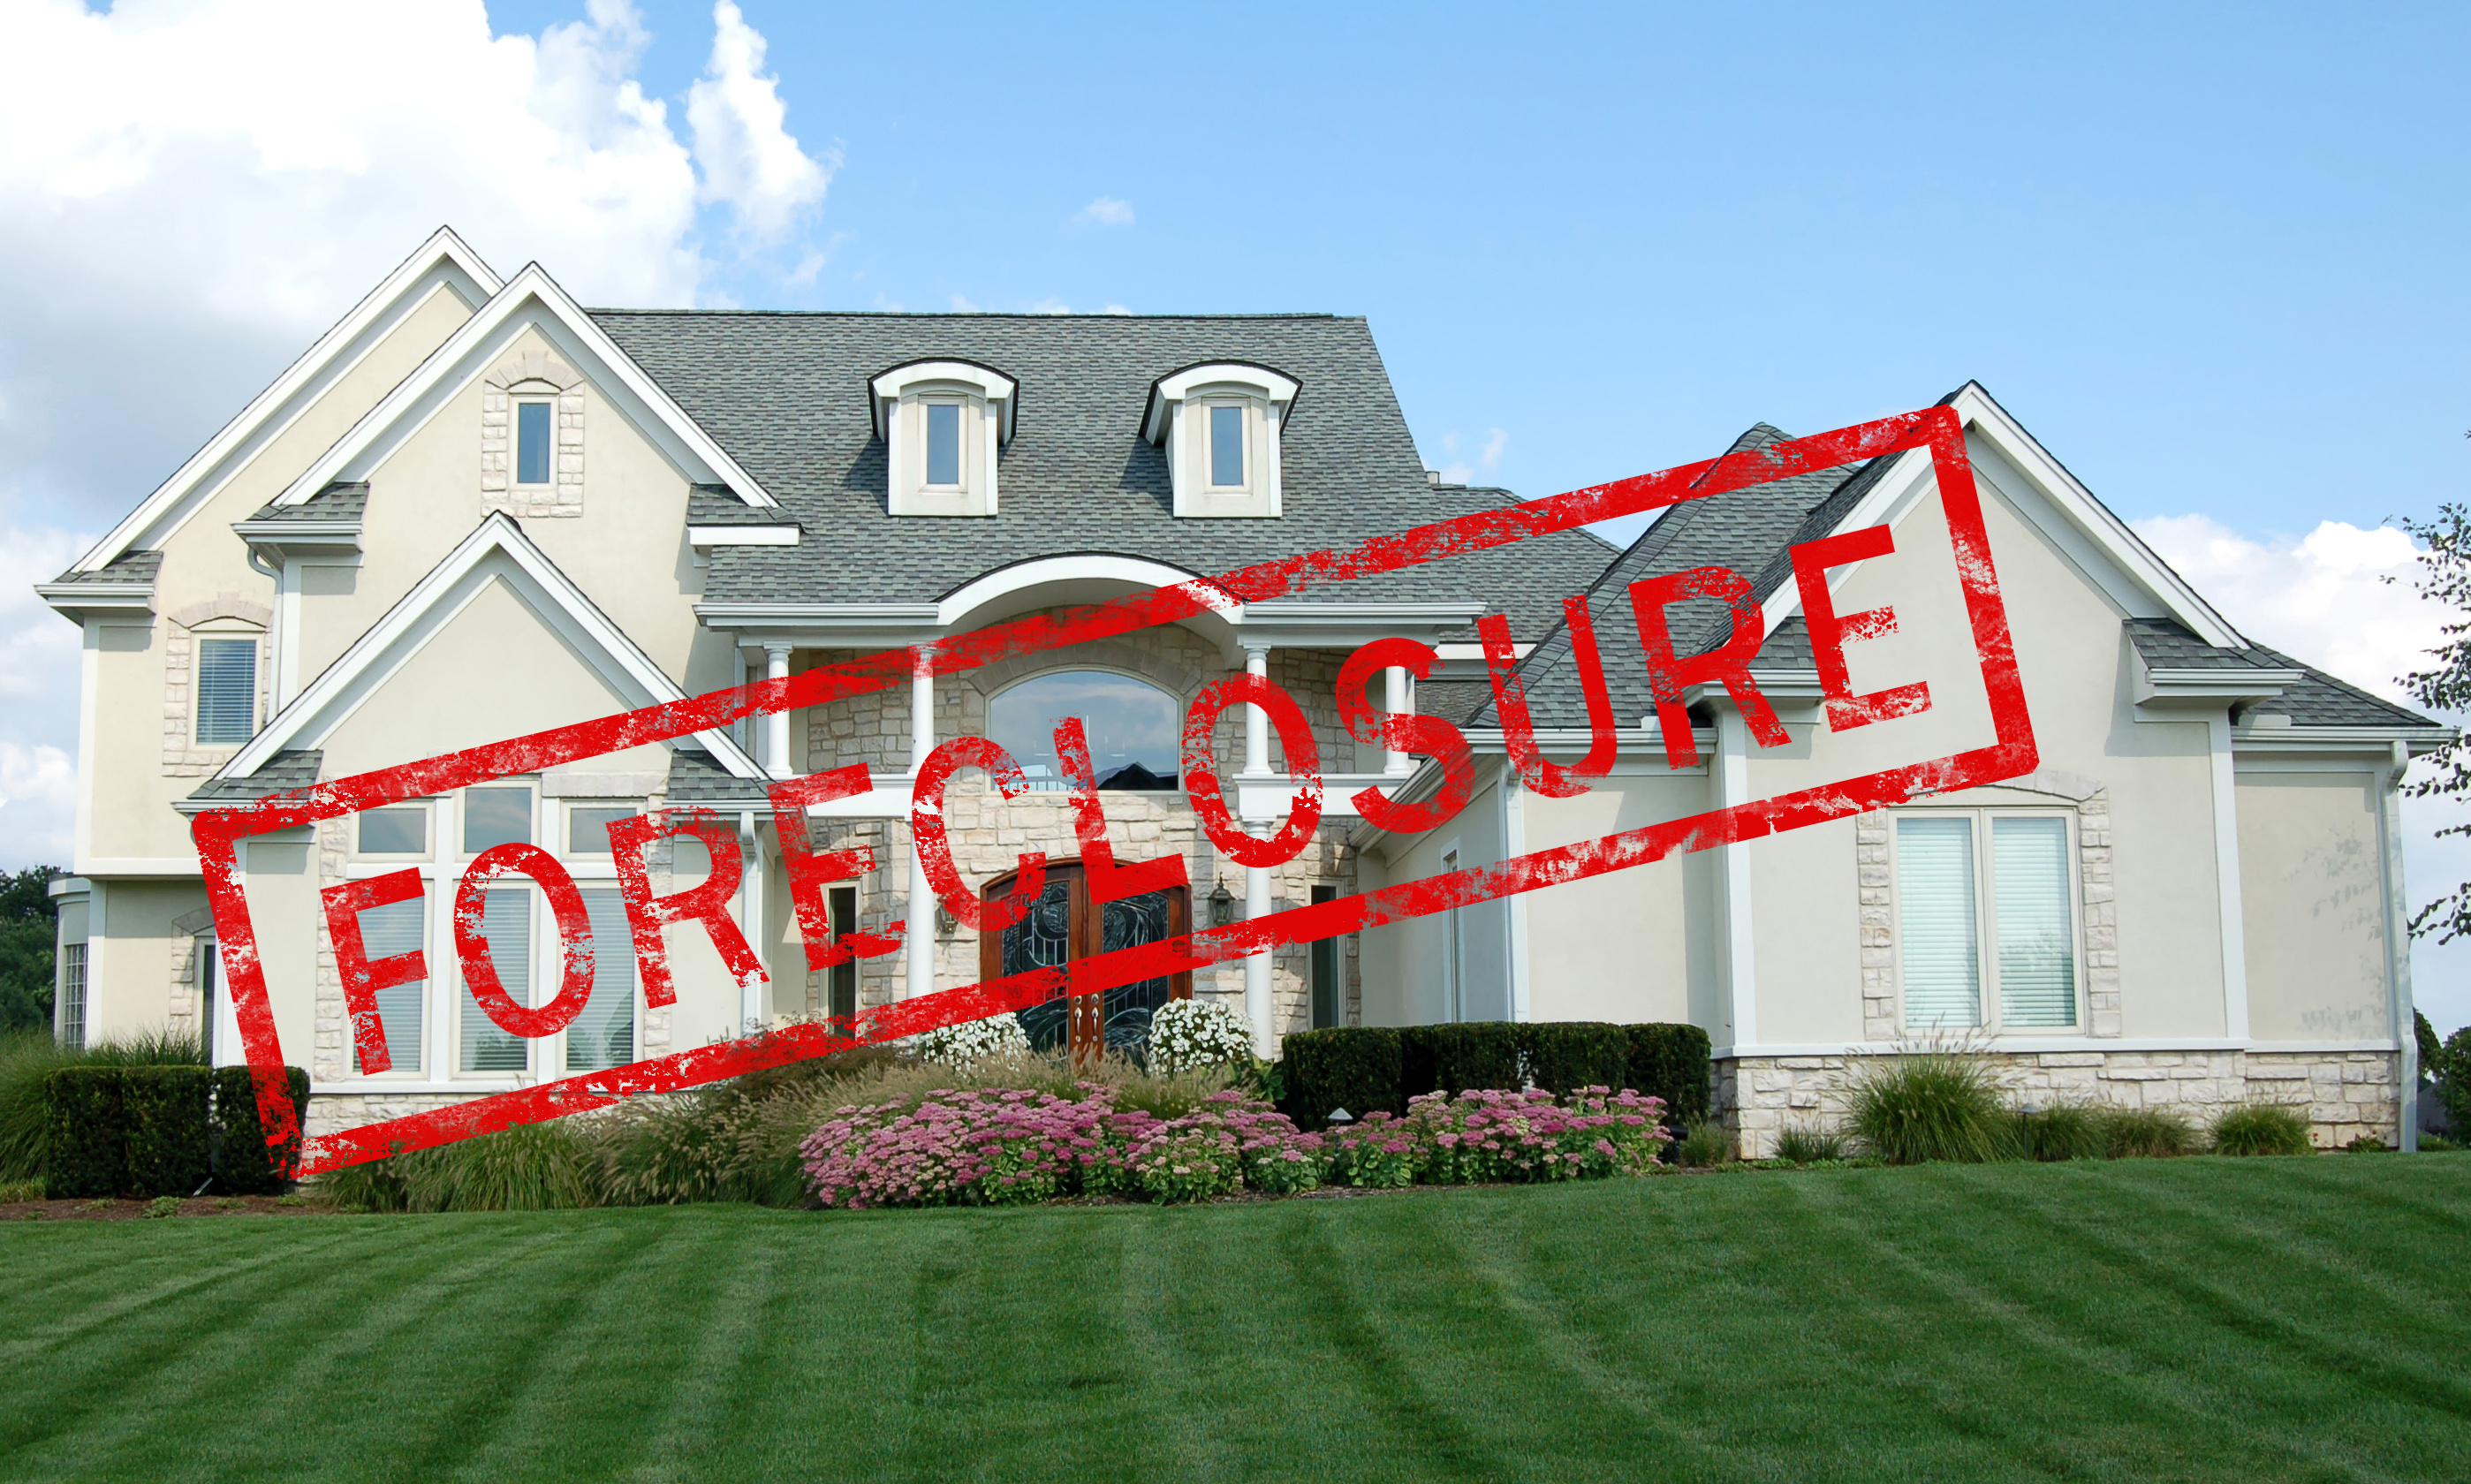 Call Astute Appraisals, Inc. to order valuations of Howard foreclosures